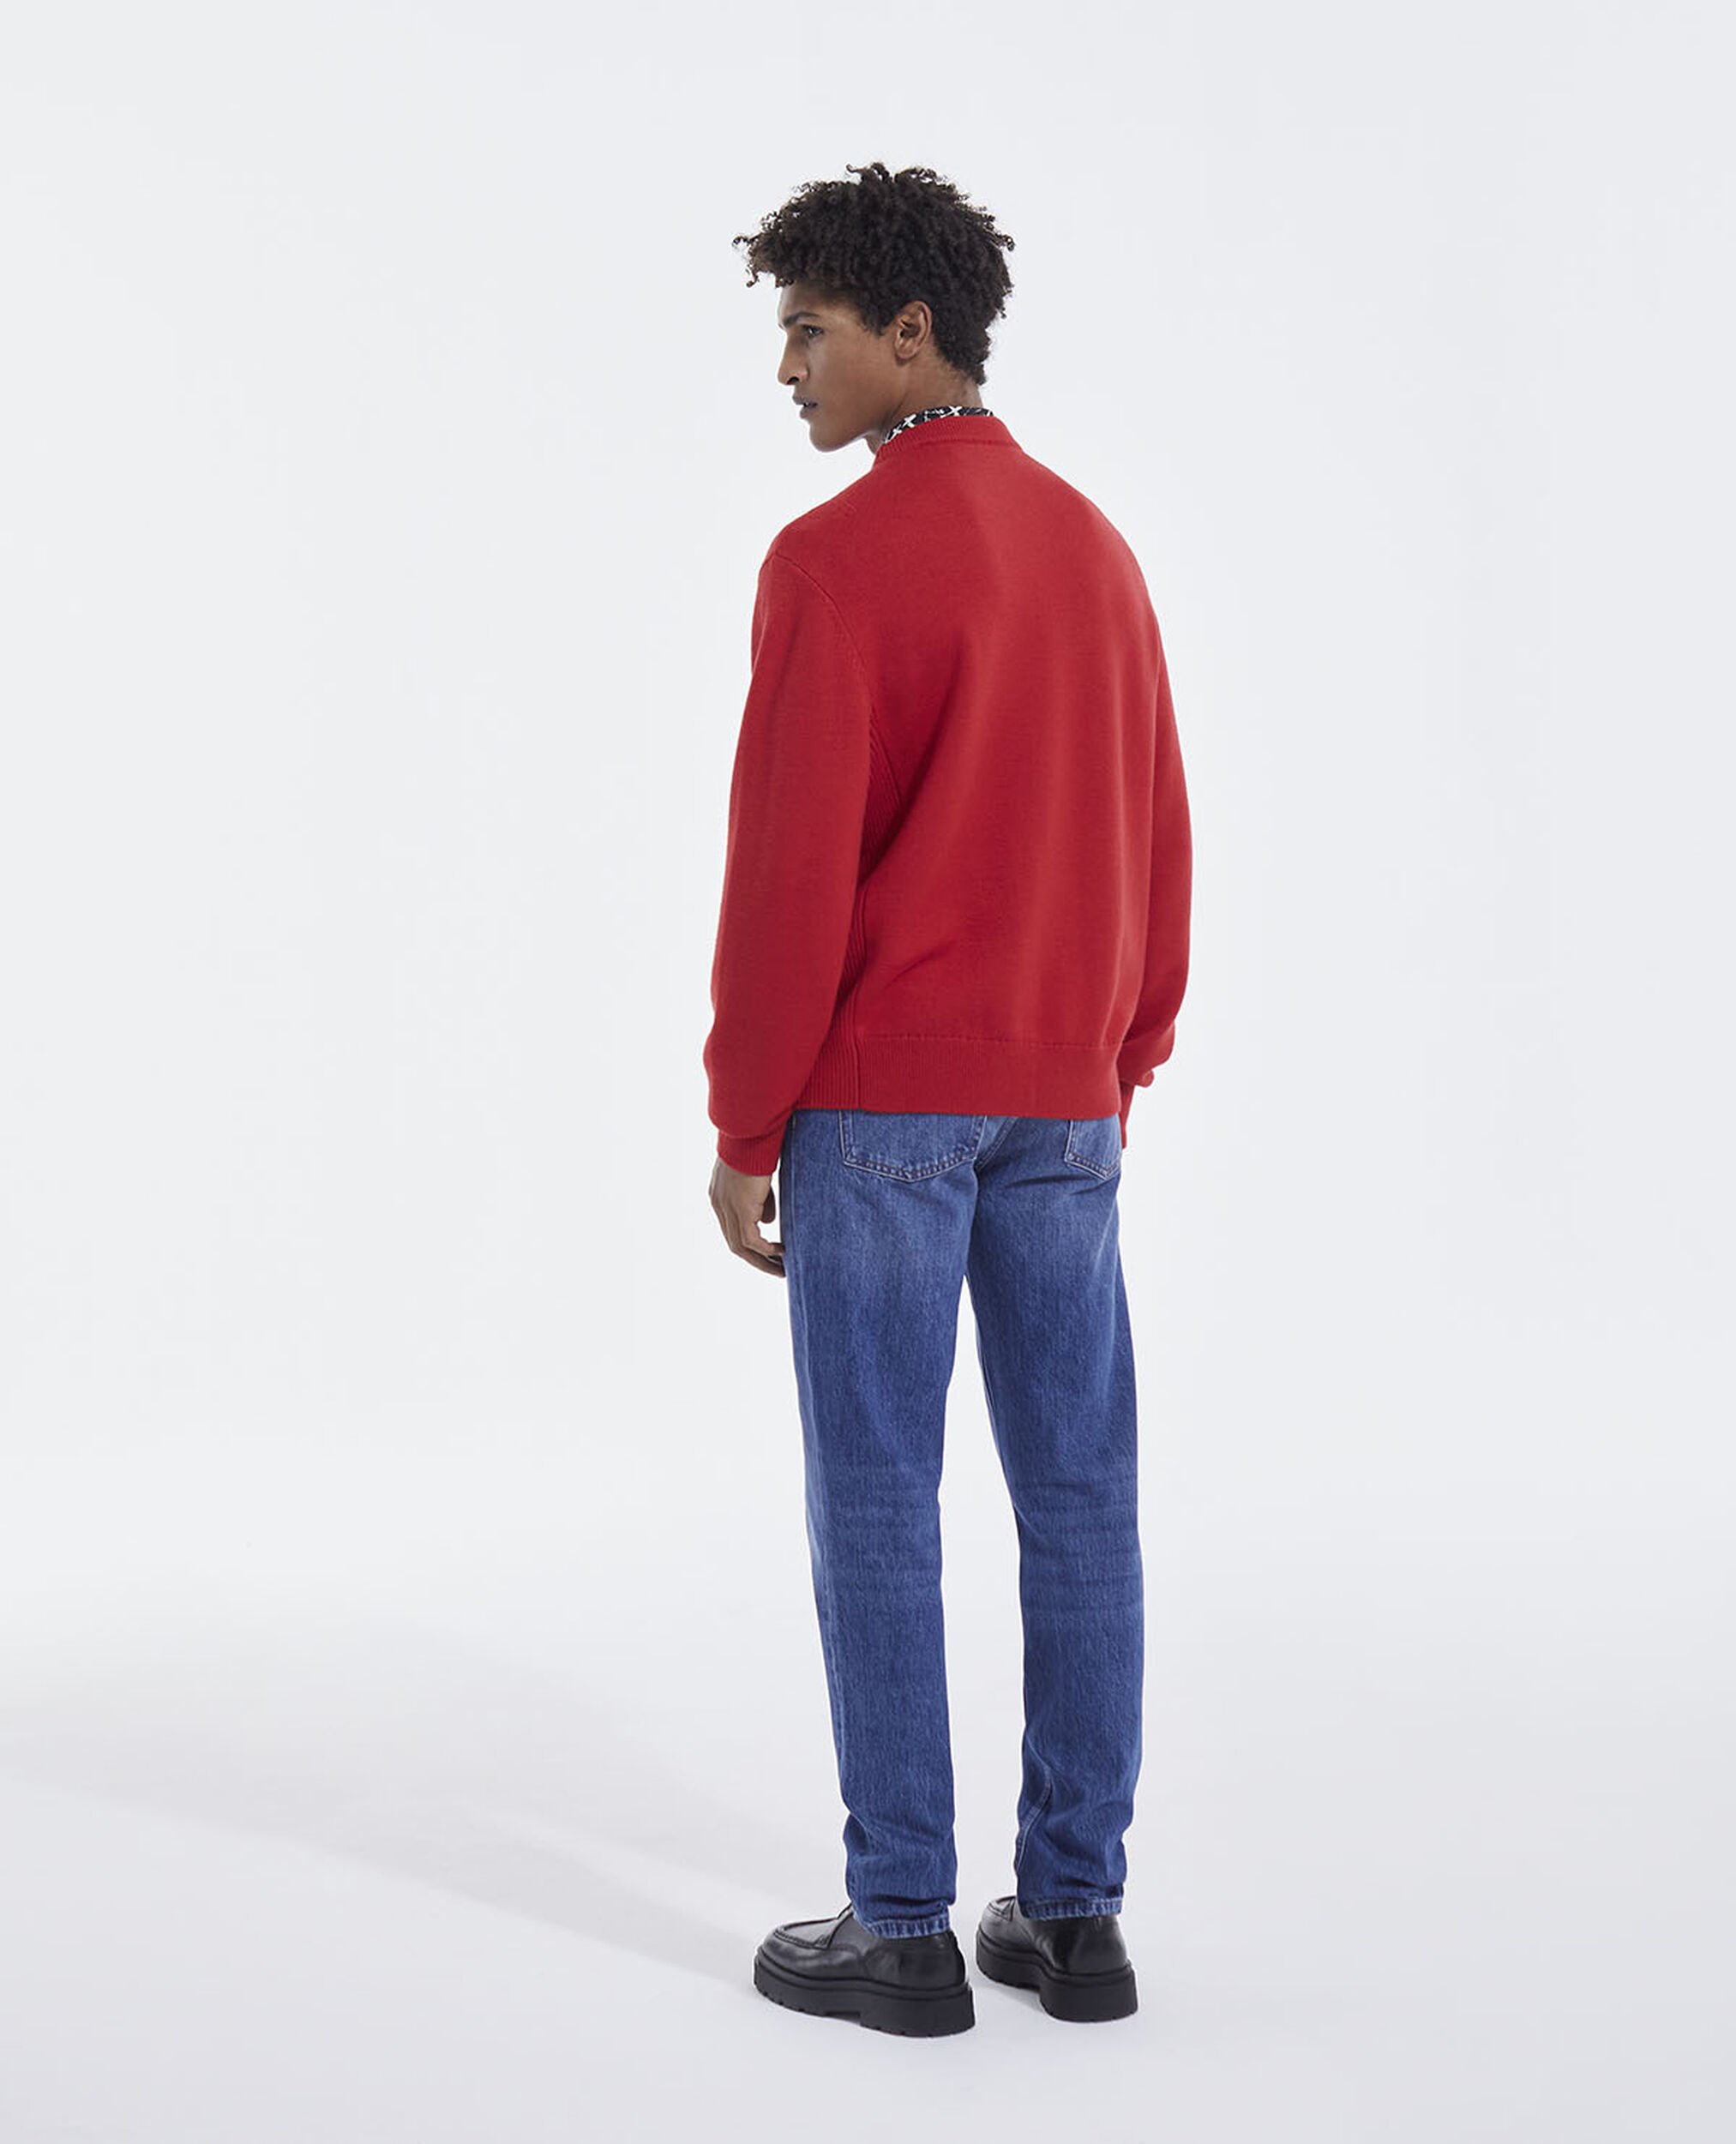 Classic fit red wool sweater with crew neck, RED, hi-res image number null